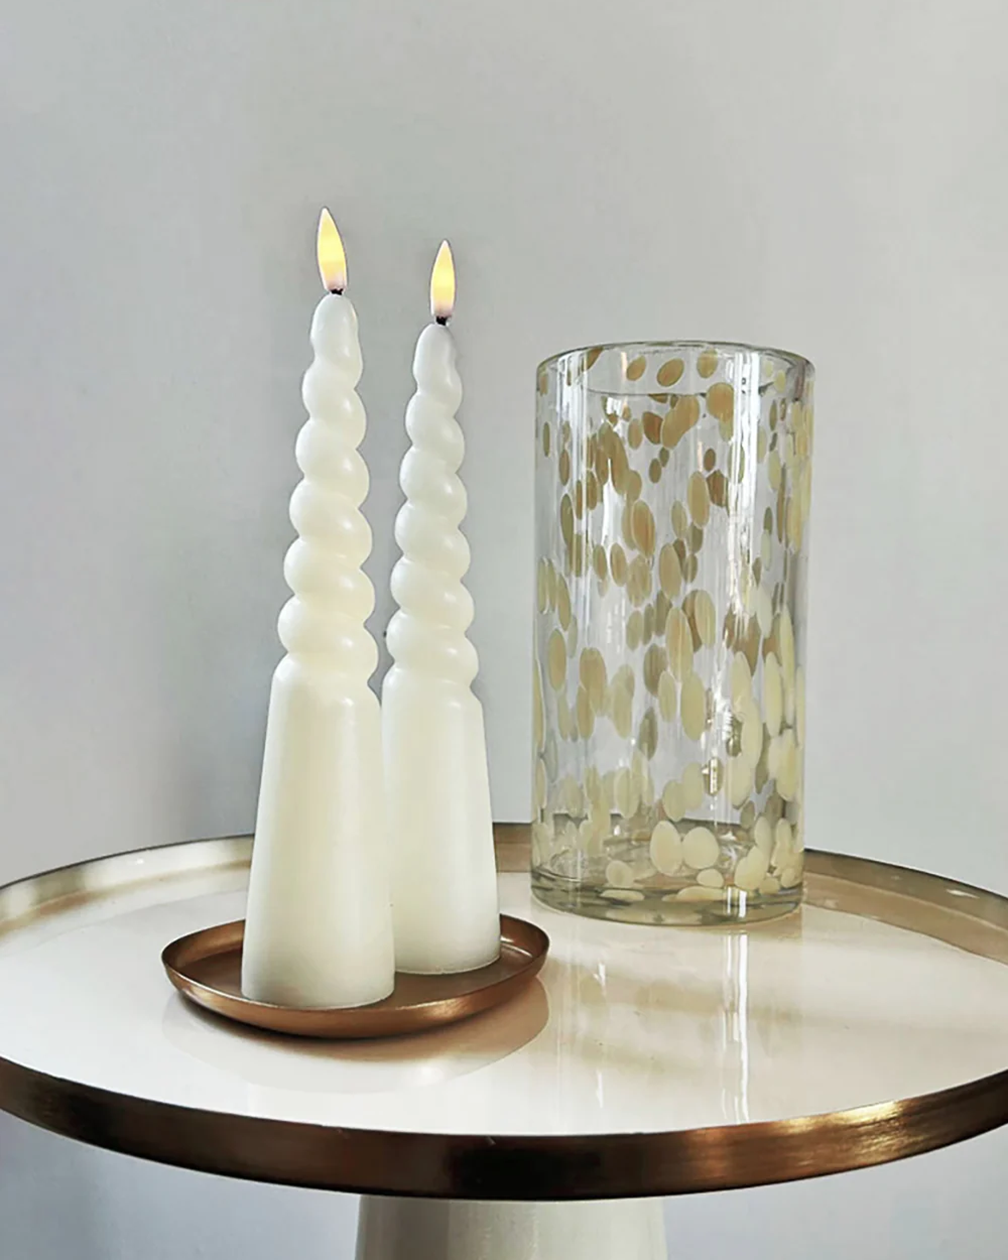 2 TWISTED PILLAR LED CANDLES NATURAL IVORY WAX D5.5 H24.5 CM